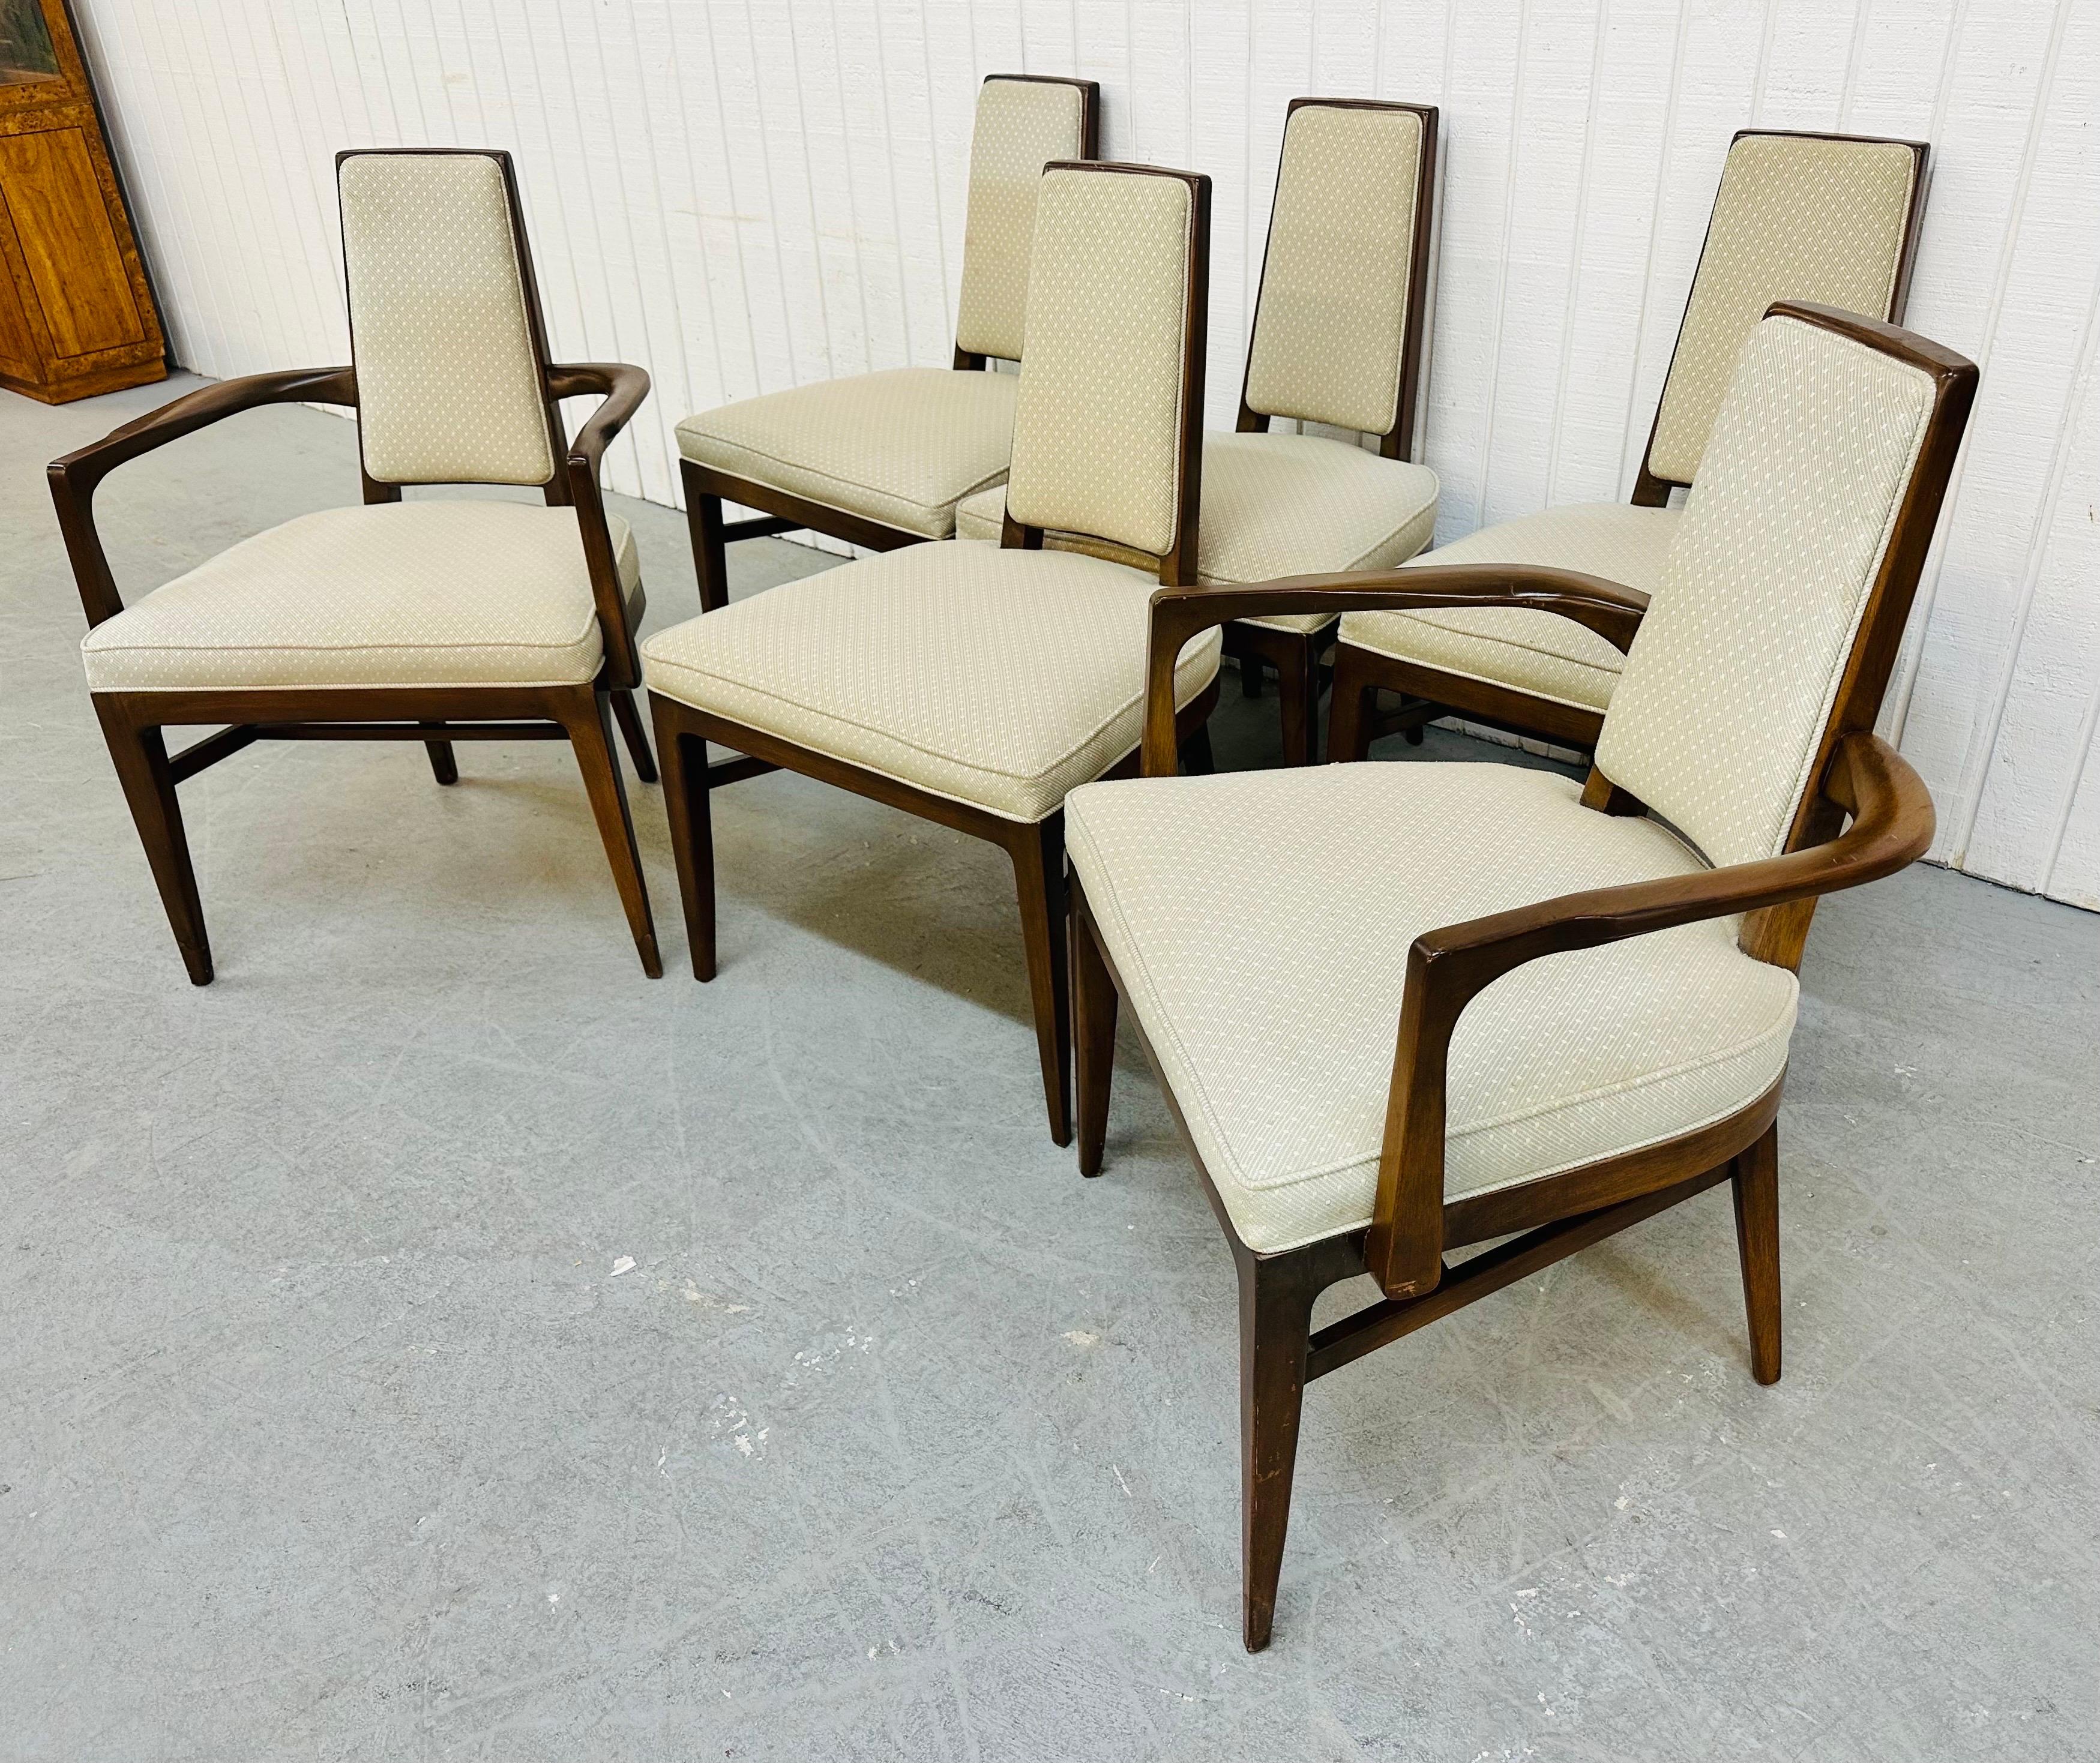 This listing is for a set of six Mid-Century Modern Walnut Dining Chairs. Featuring two arm chairs, four straight chairs, walnut frames, light gray upholstery, and tall skinny Adrian Pearsall style back rests. This is an exceptional combination of